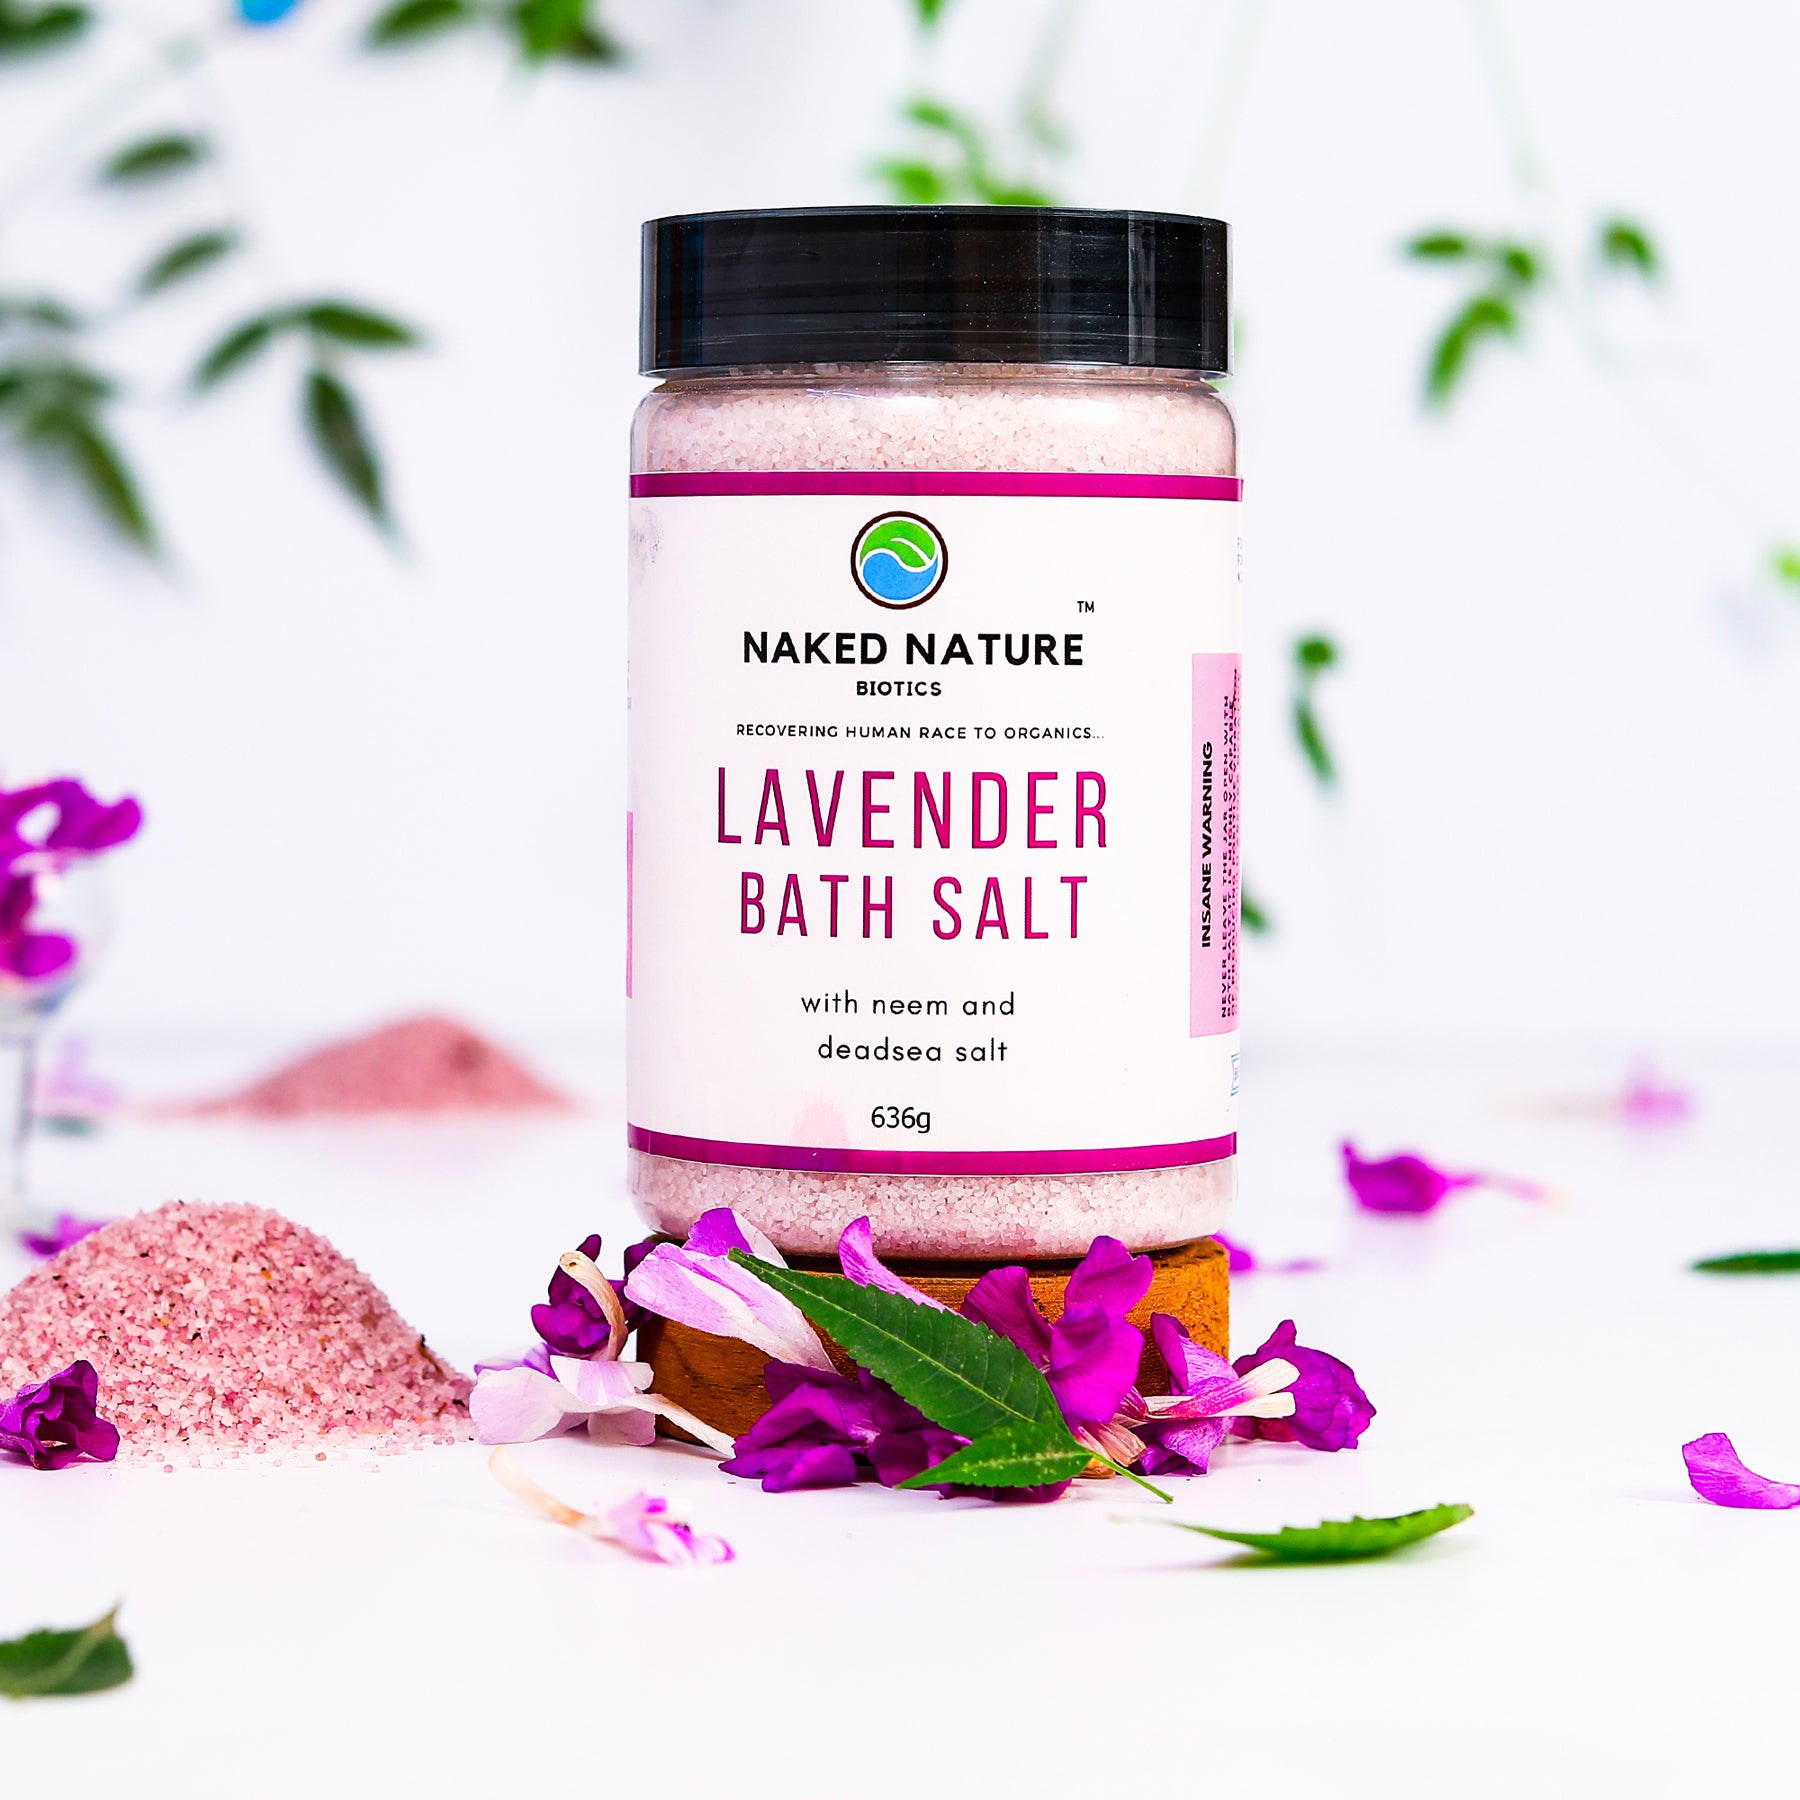 Lavender Bath Salt (636G) - For Foot Soak, Cures Dark Foot, Anti-Fungal and Relieves Body Ache.